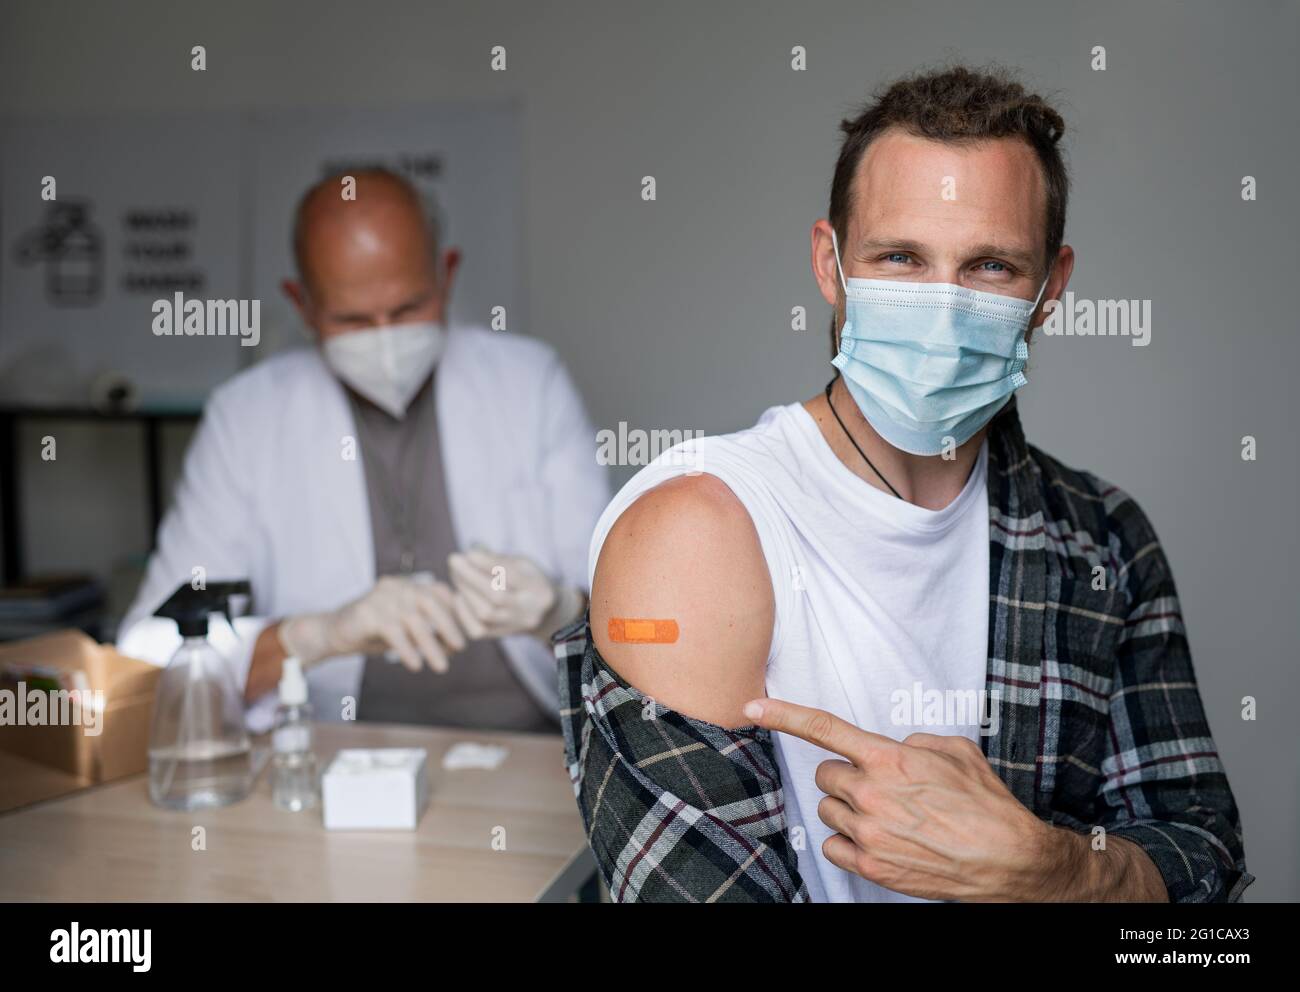 Happy mid adult man after covid-9 vaccination, pointing to plaster on arm and looking at camera. Stock Photo